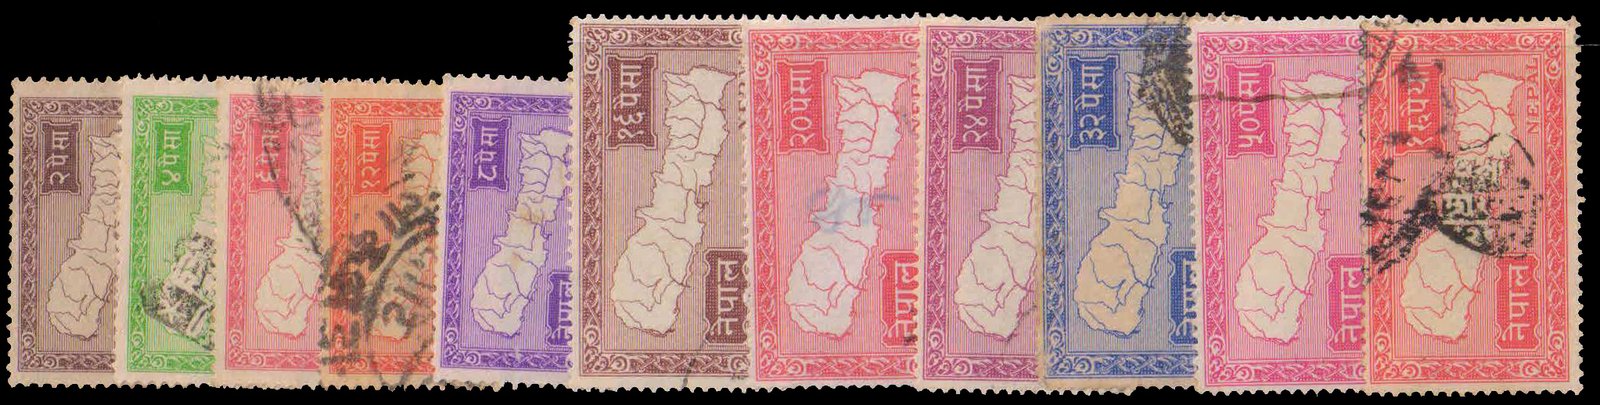 NEPAL 1954-Map of Nepal-2 Pies to 1 Re. Used, 11 Different, S.G. 85 to 95, Cat � 36